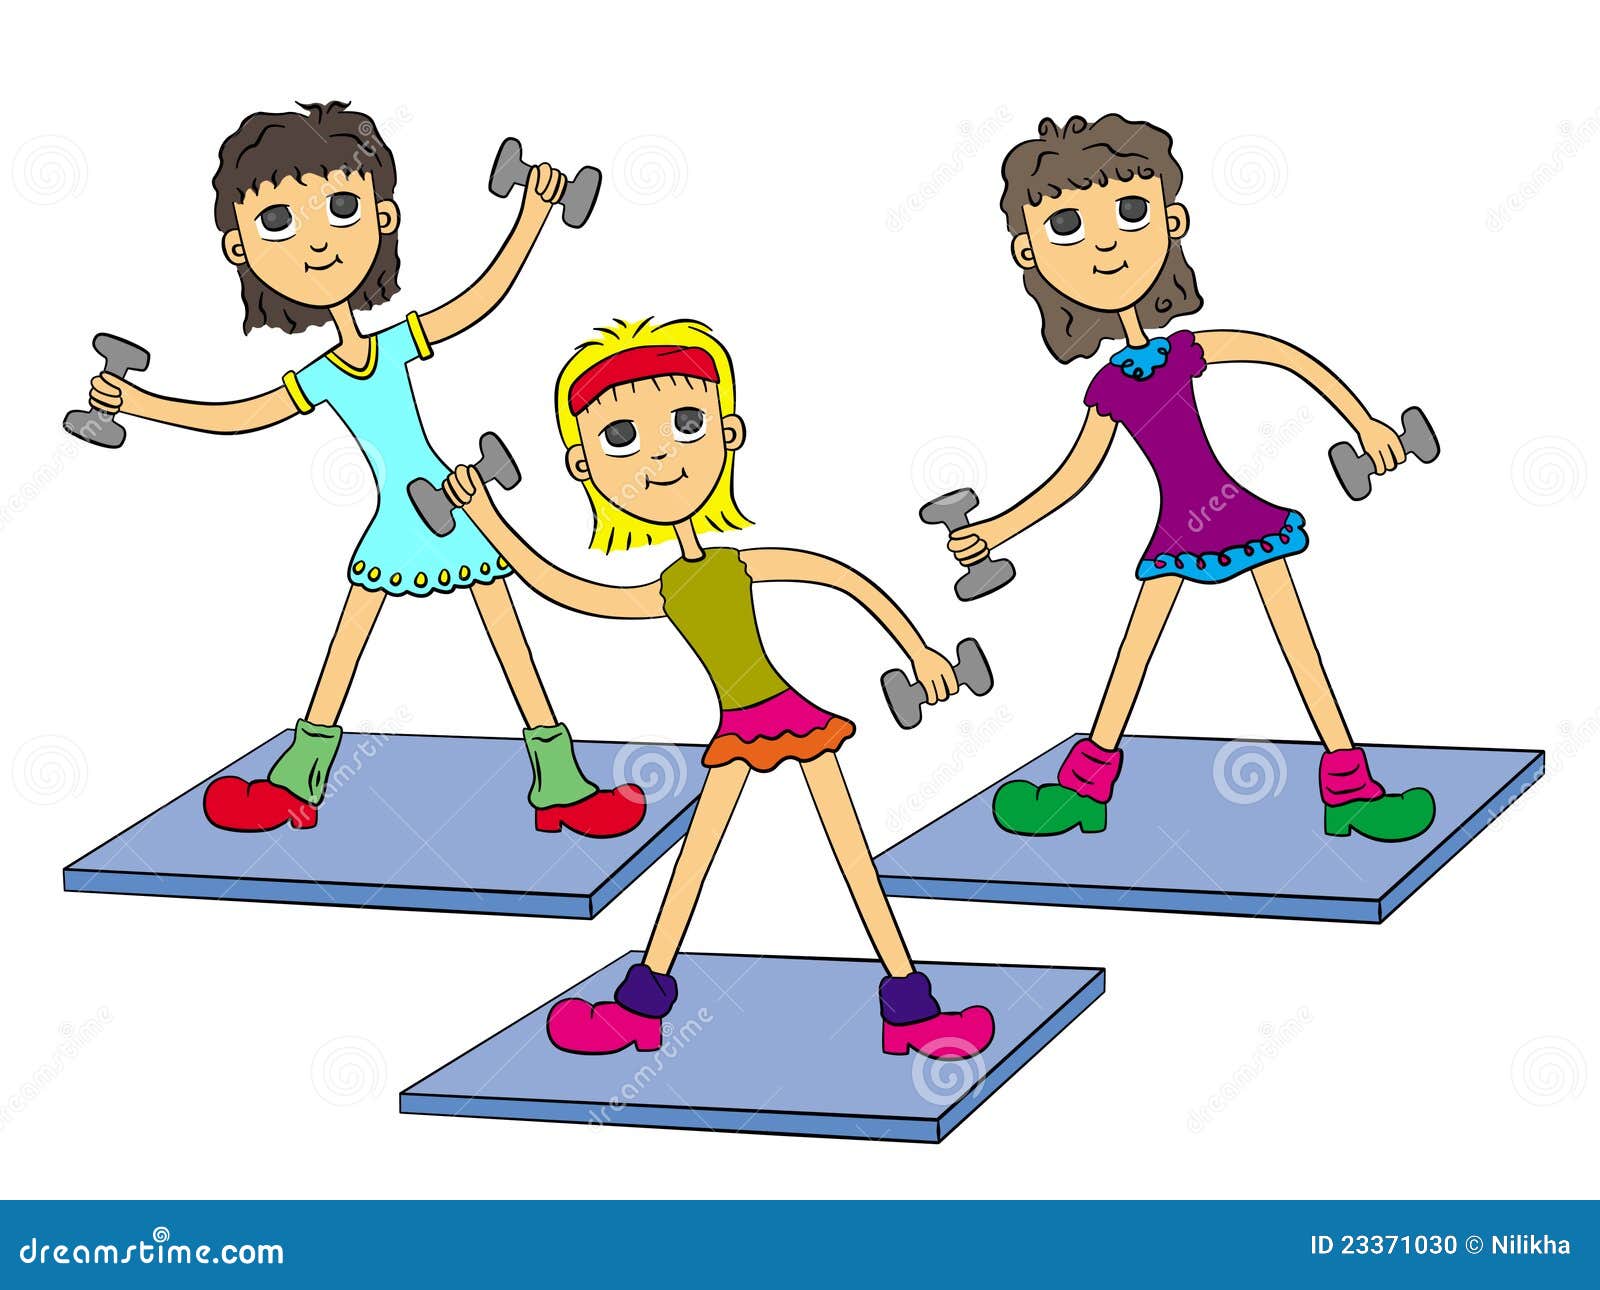 fitness instructor clipart - photo #45